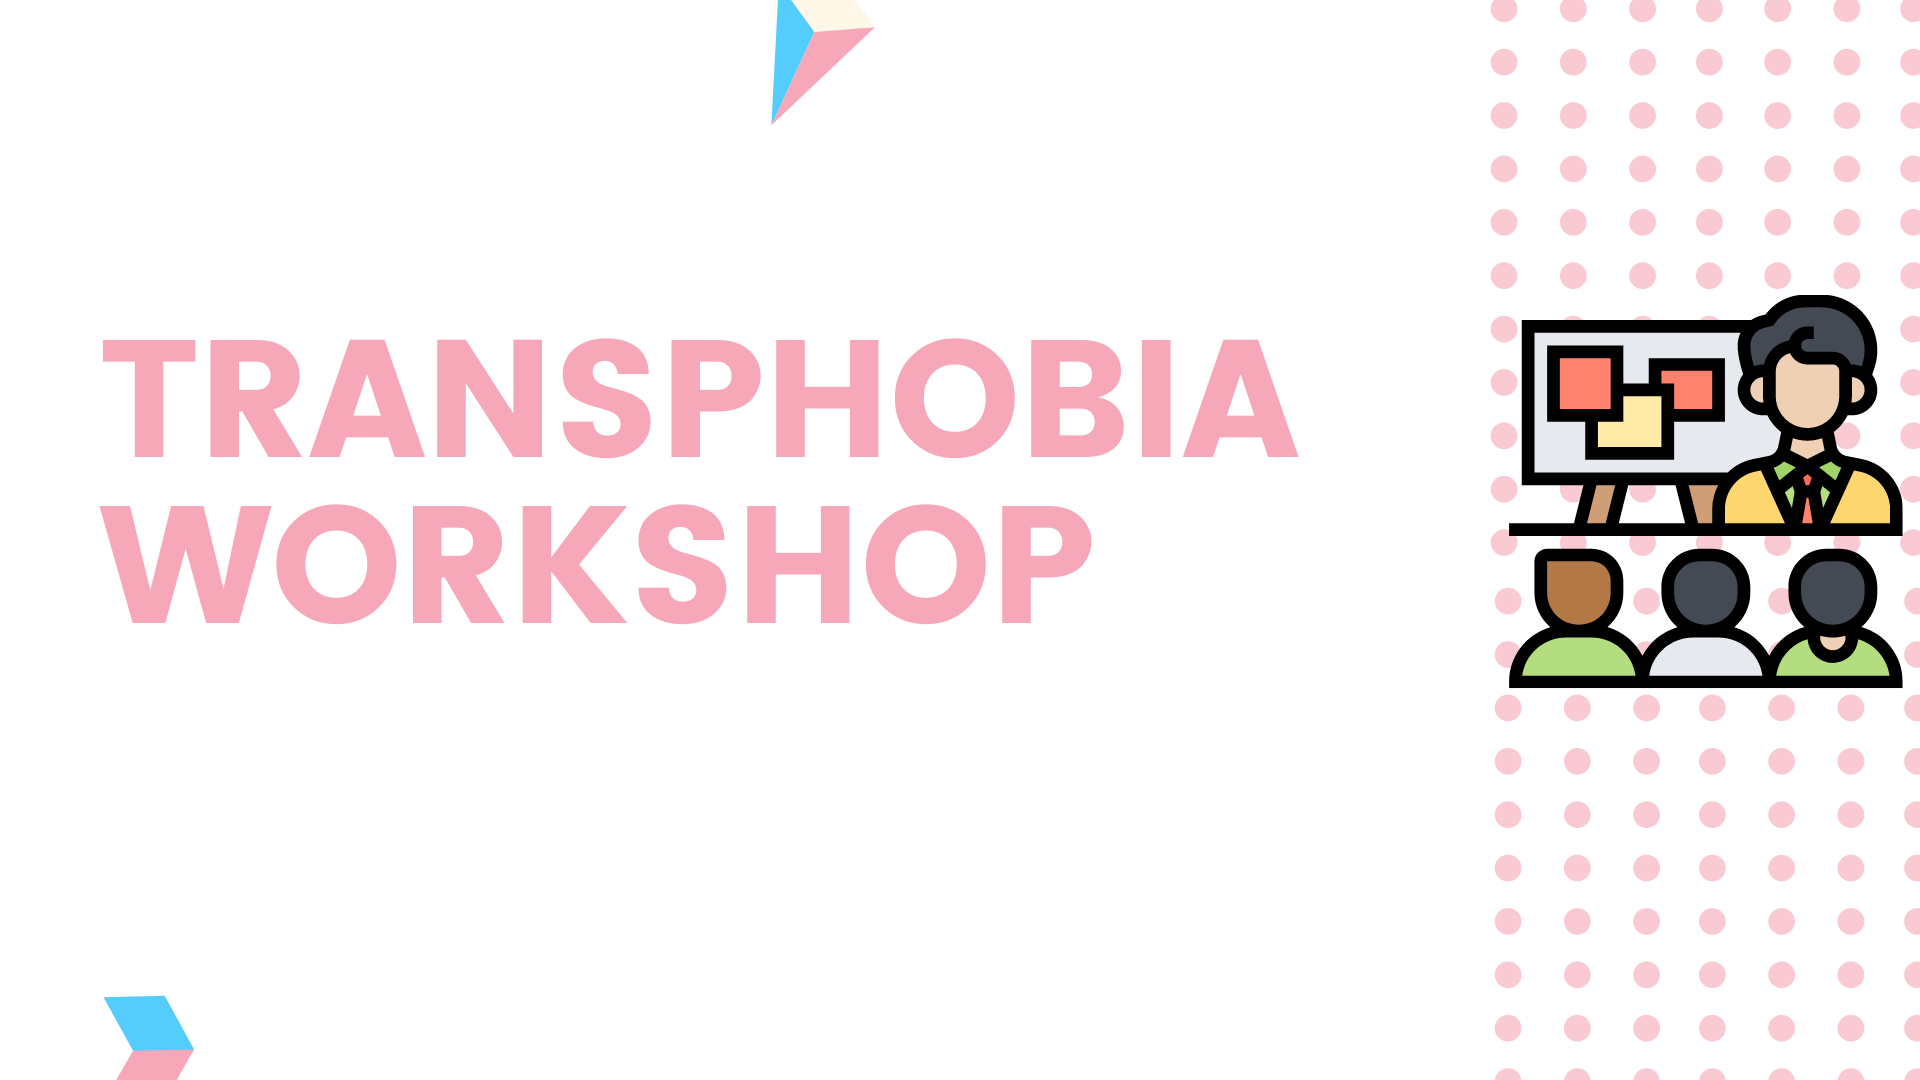 The Transphobia Workshop logo featuring an icon of 3 people watching another person present information on a board